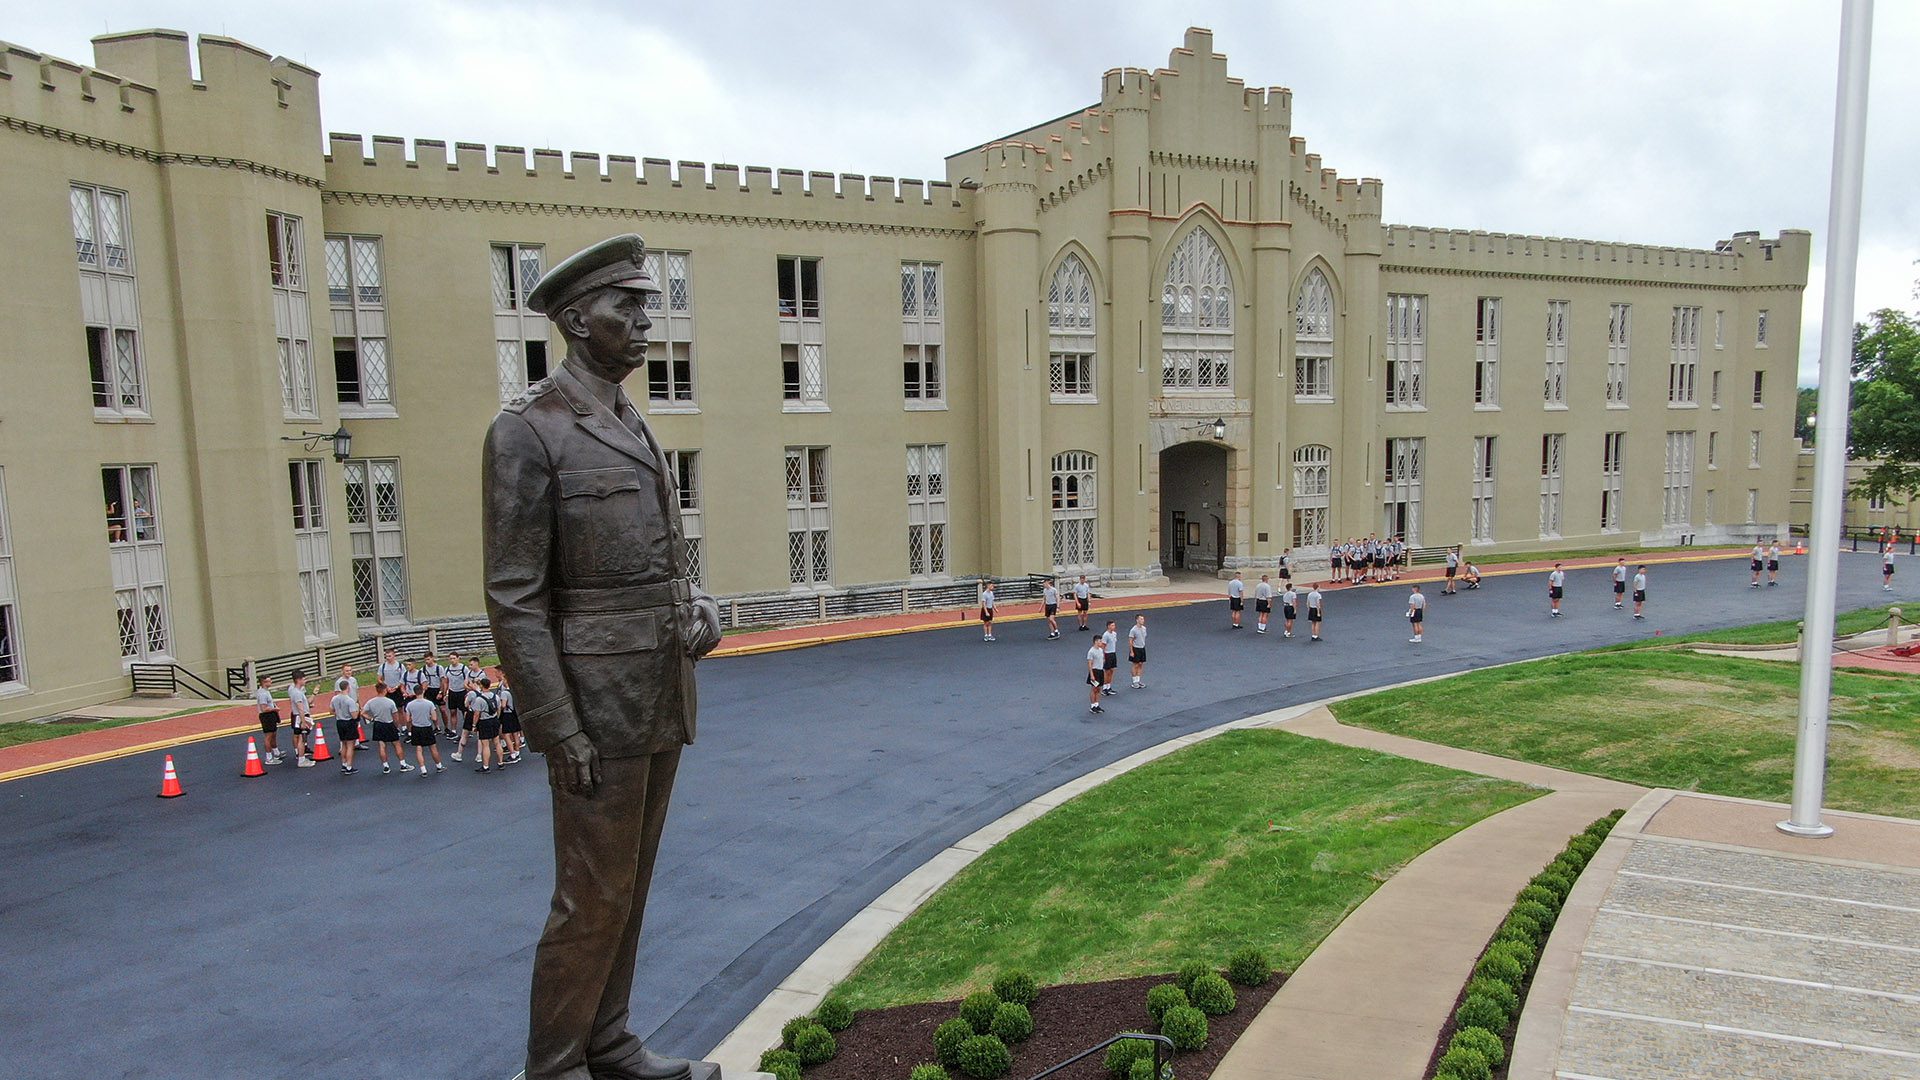 Marshall statue with old barracks in background